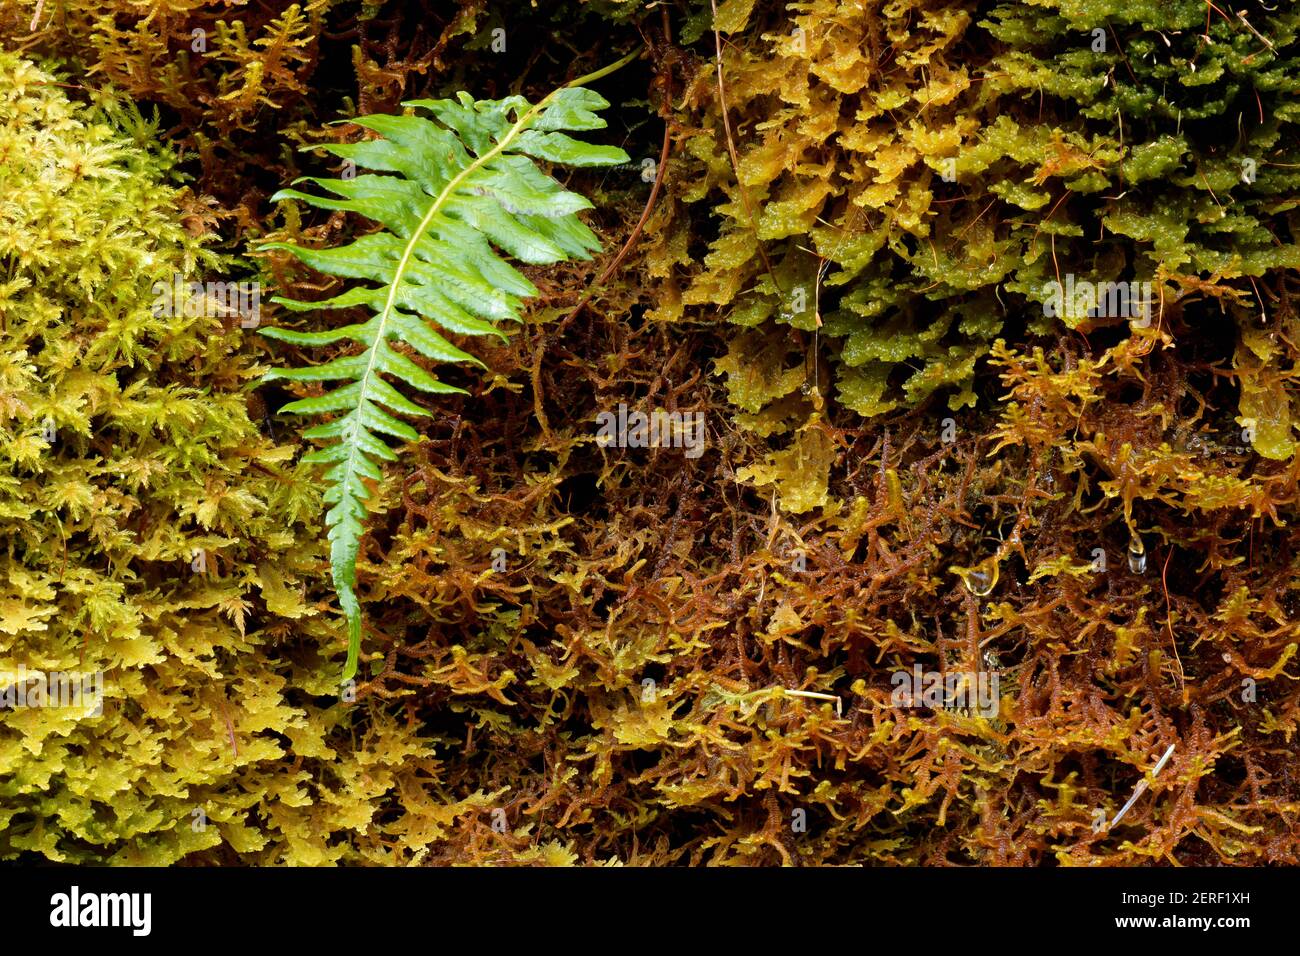 Licorice fern growing from moss on bigleaf maple tree, Graves Creek Campground, Quinault Rainforest, Olympic National Park, Jefferson County, Washingt Stock Photo